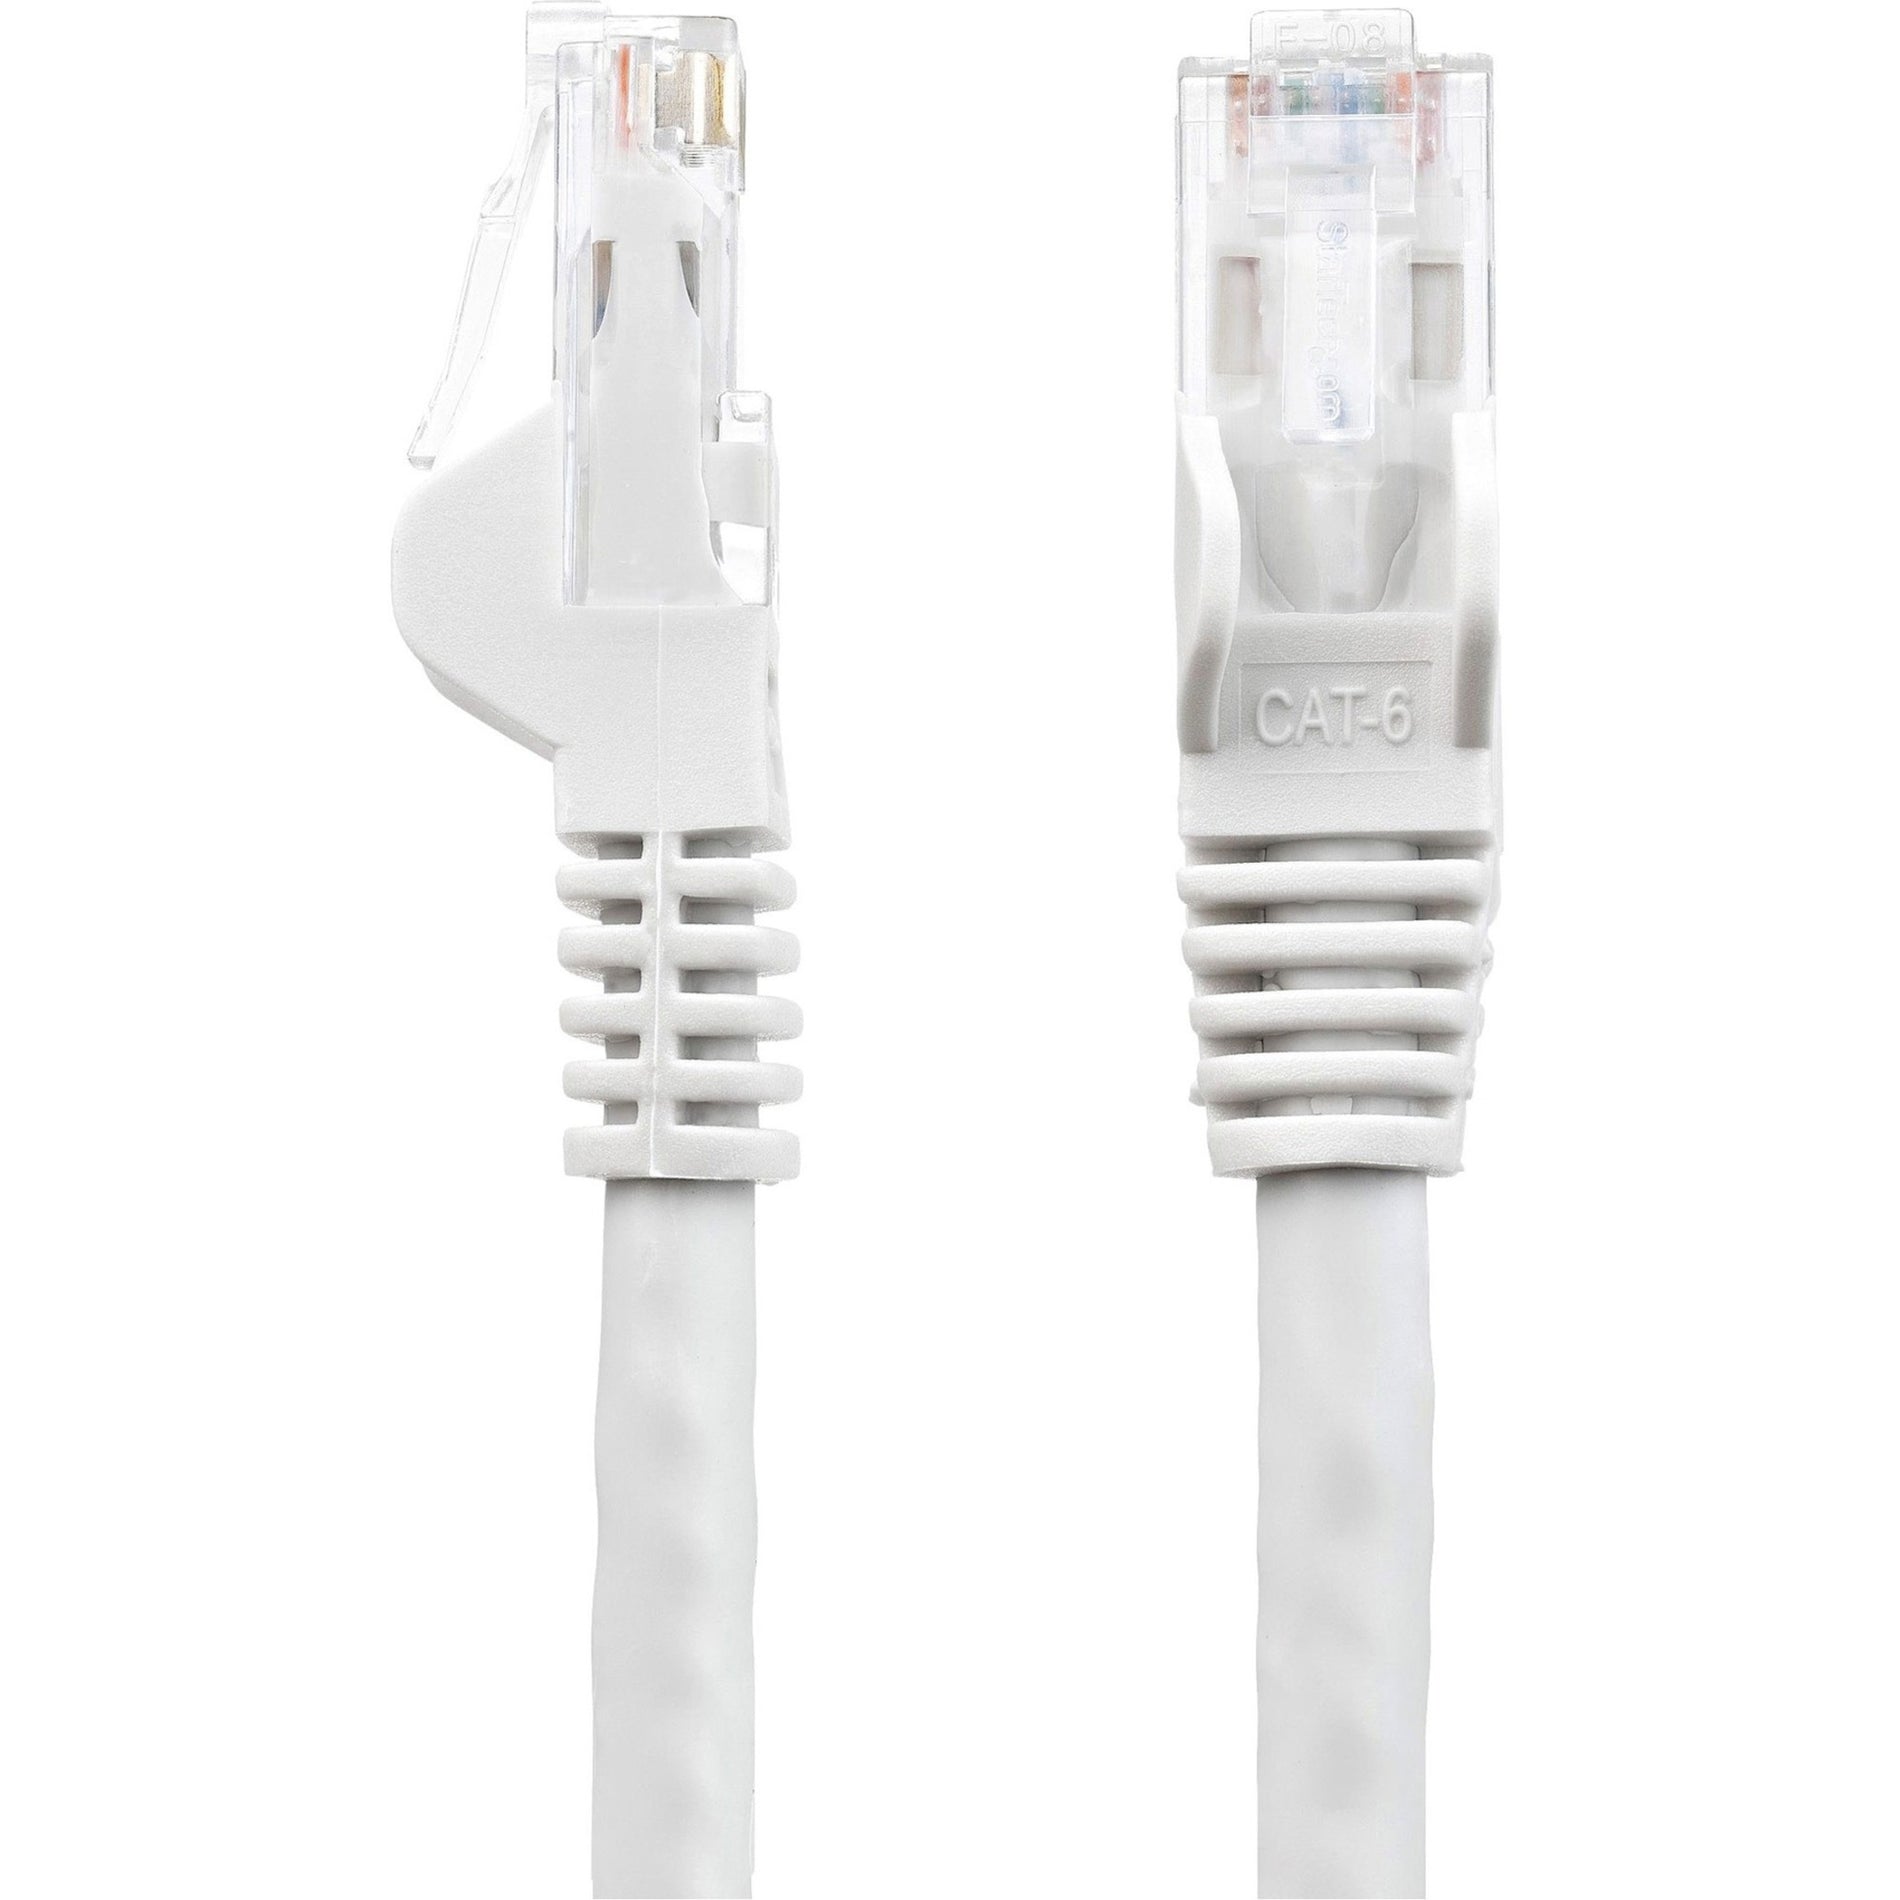 StarTech.com N6PATCH20WH Cat. 6 Network Cable, 20ft White Ethernet Cable, Snagless RJ45 Connectors